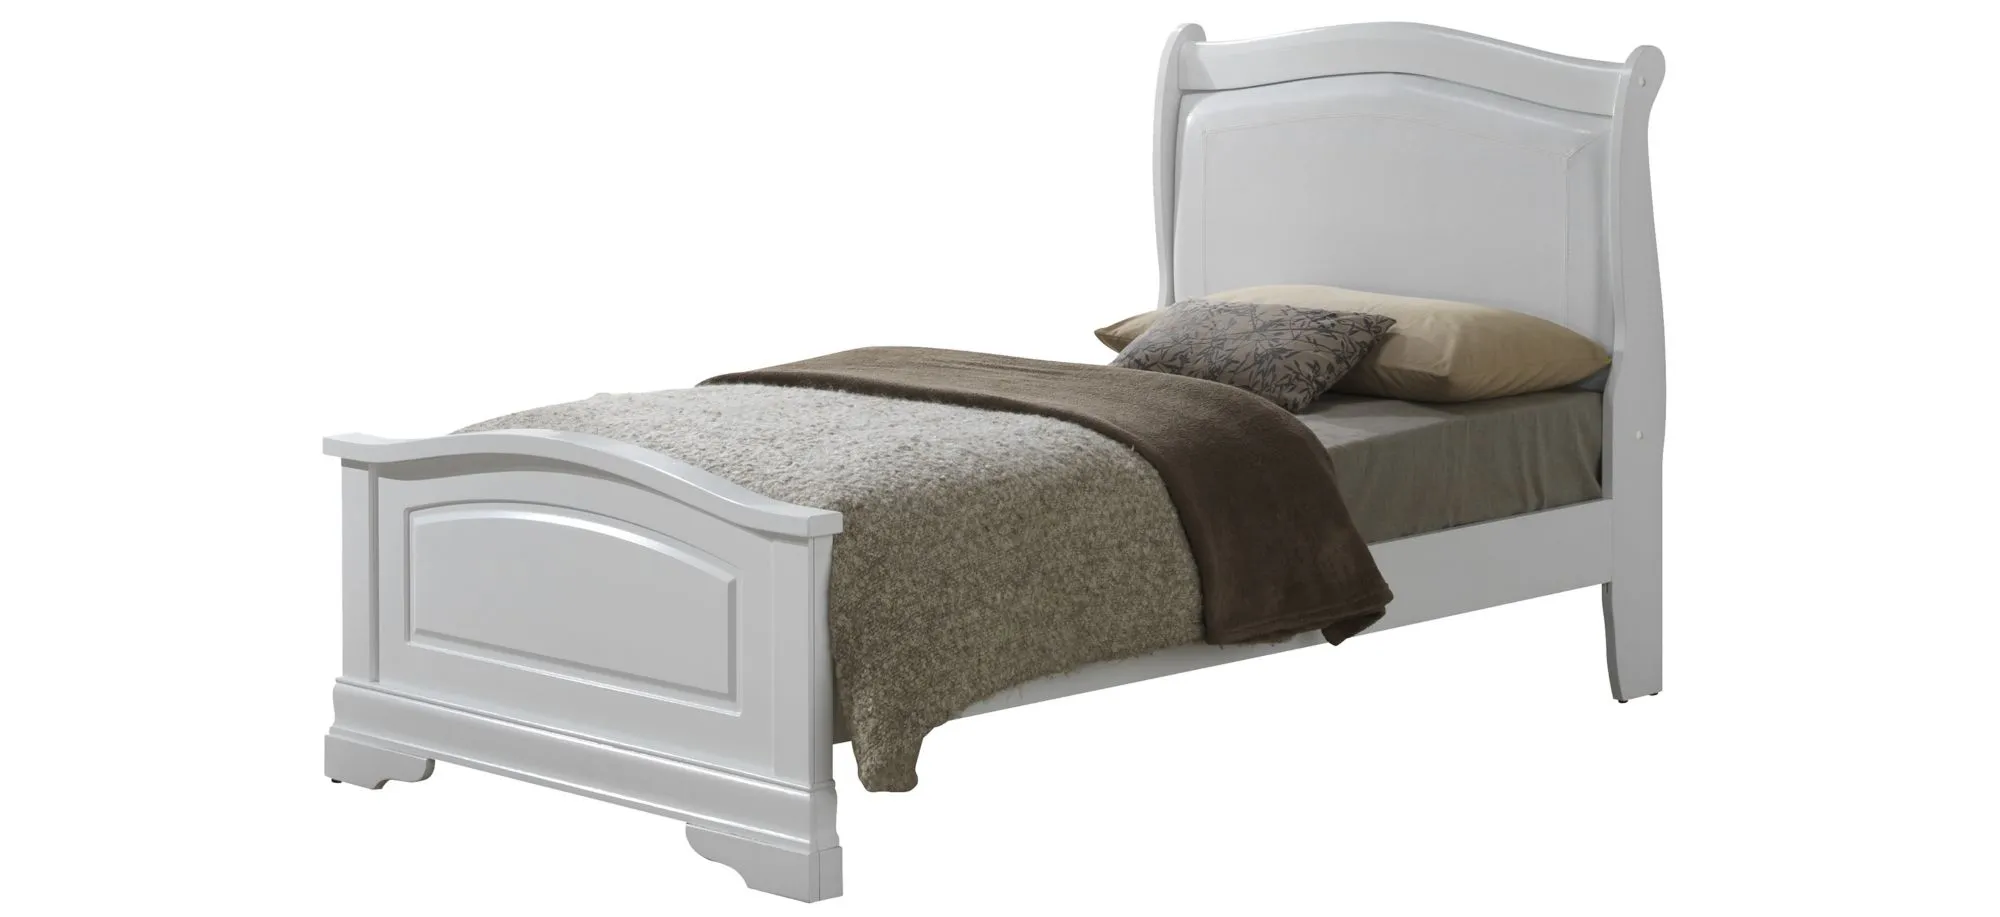 Rossie Upholstered Panel Bed in White by Glory Furniture